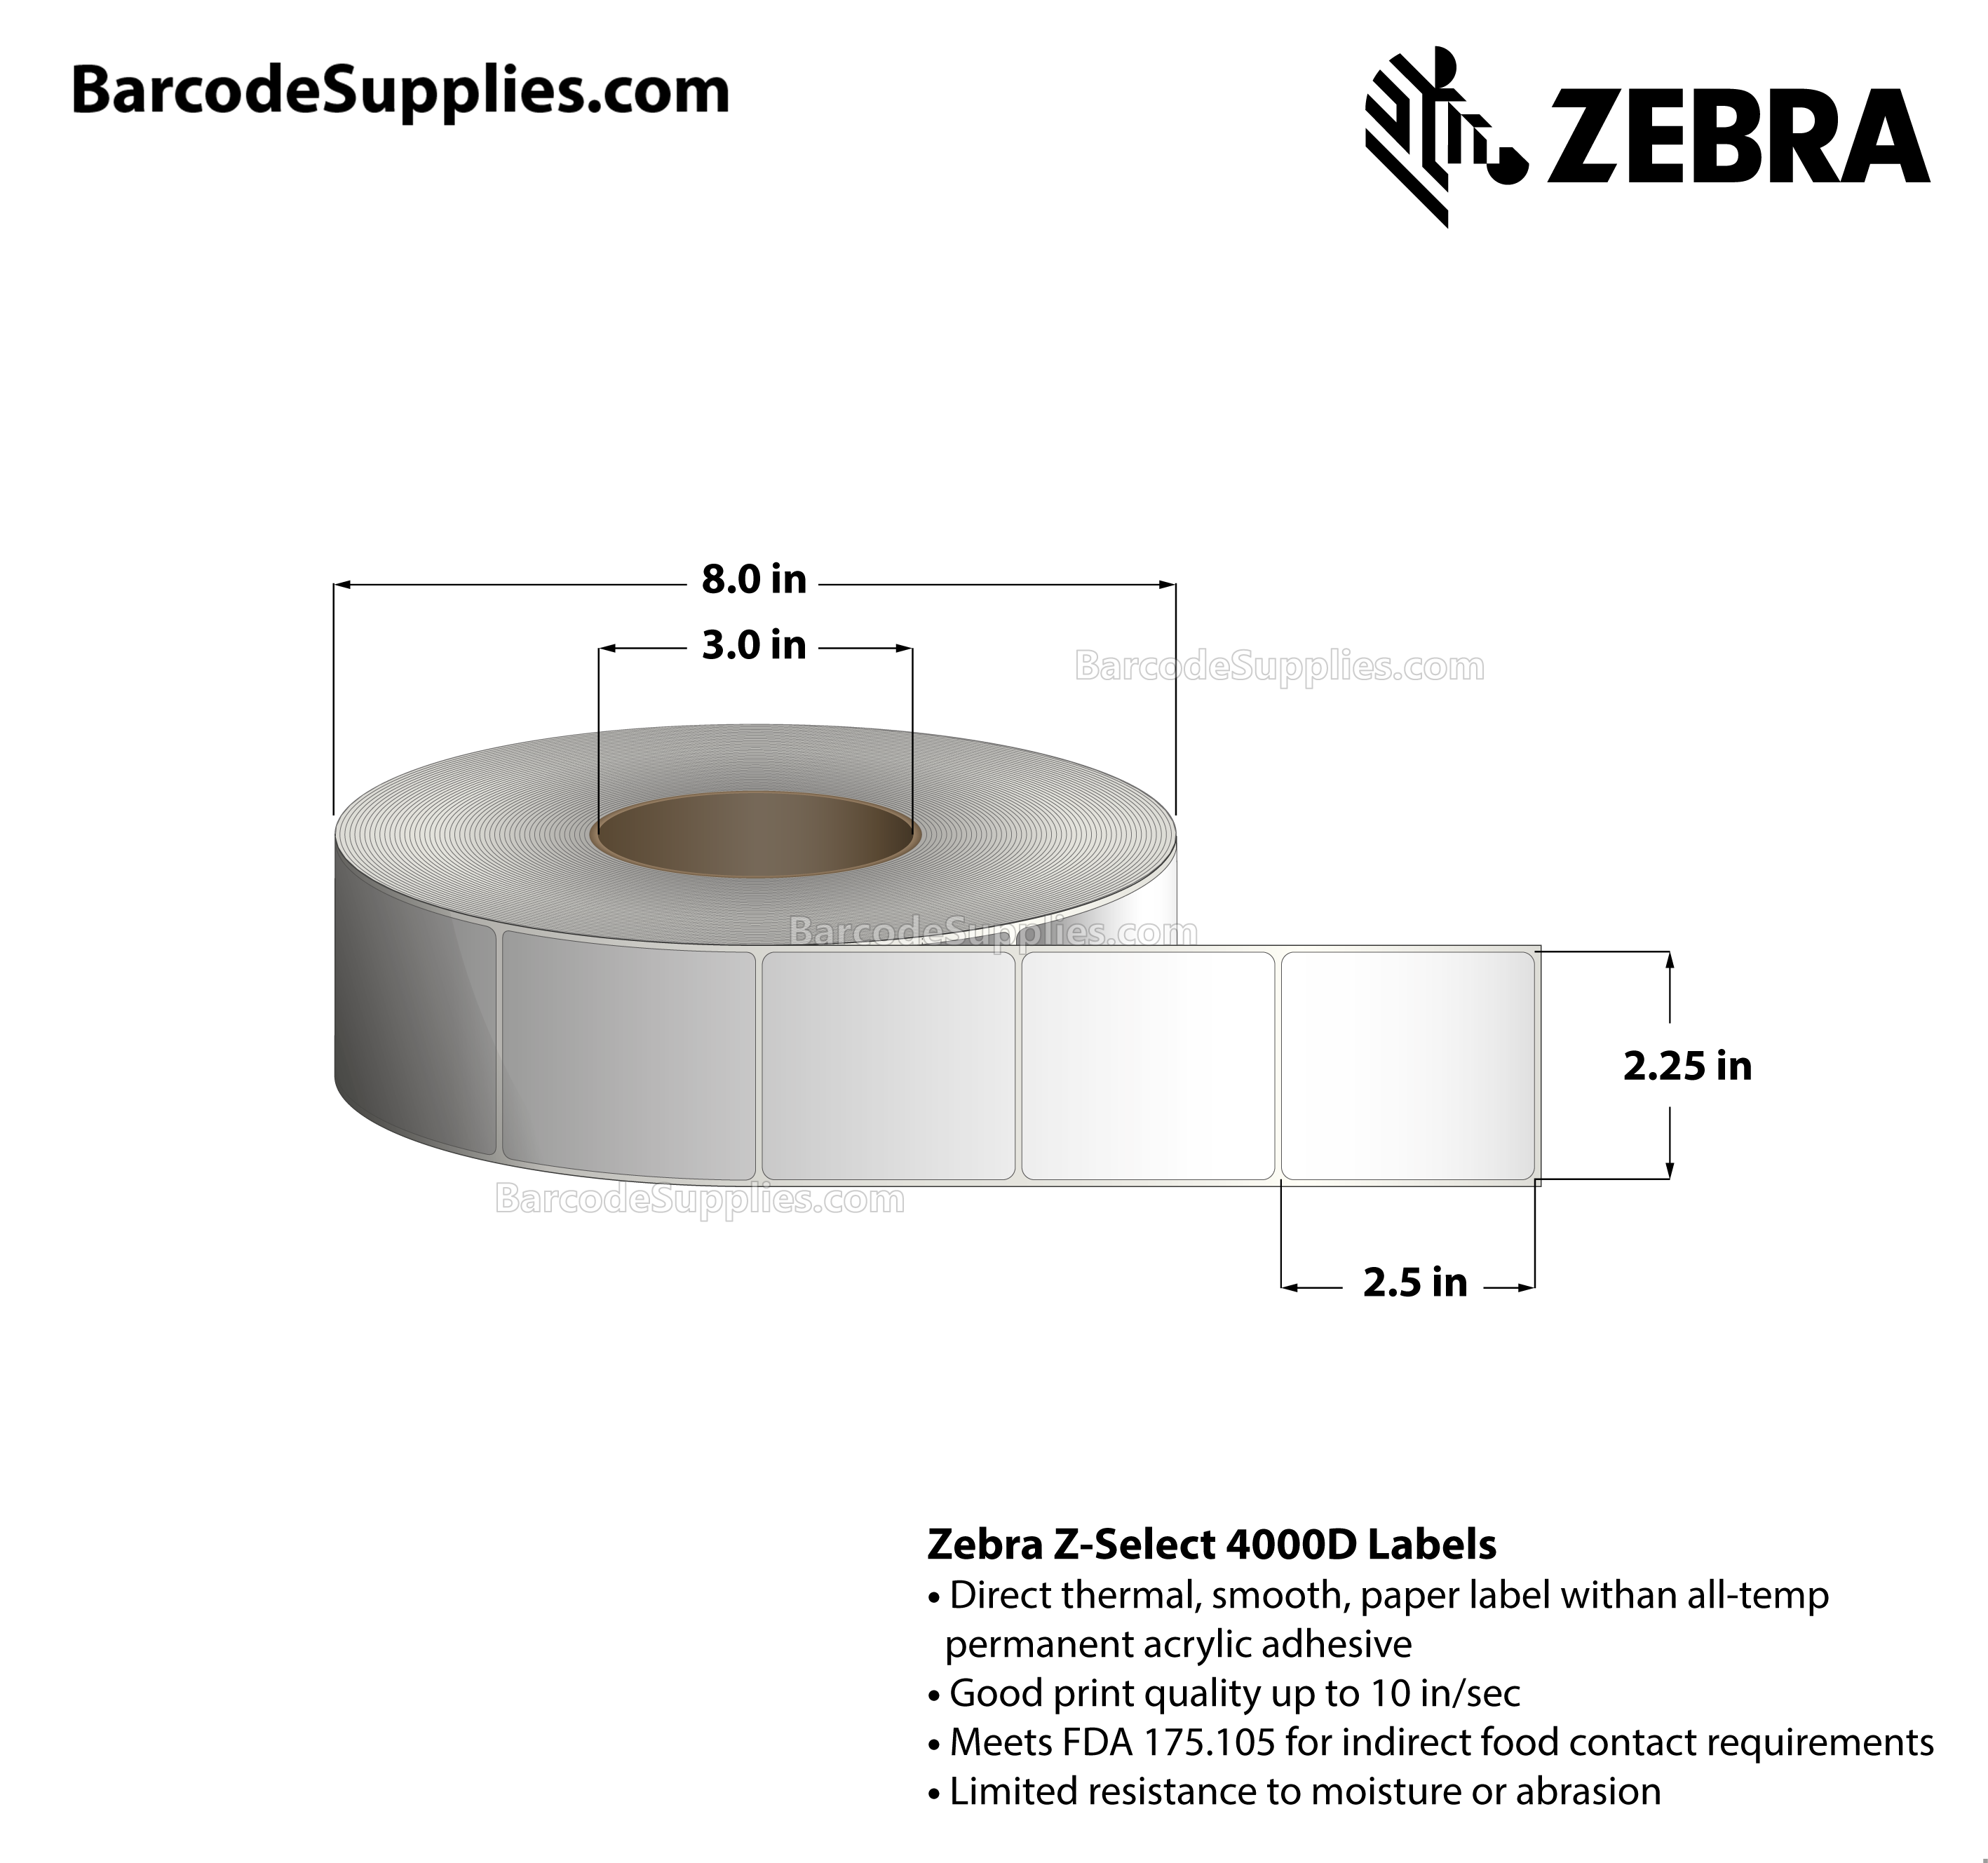 2.25 x 2.5 Direct Thermal White Z-Select 4000D Labels With All-Temp Adhesive - Not Perforated - 1980 Labels Per Roll - Carton Of 8 Rolls - 15840 Labels Total - MPN: 72277